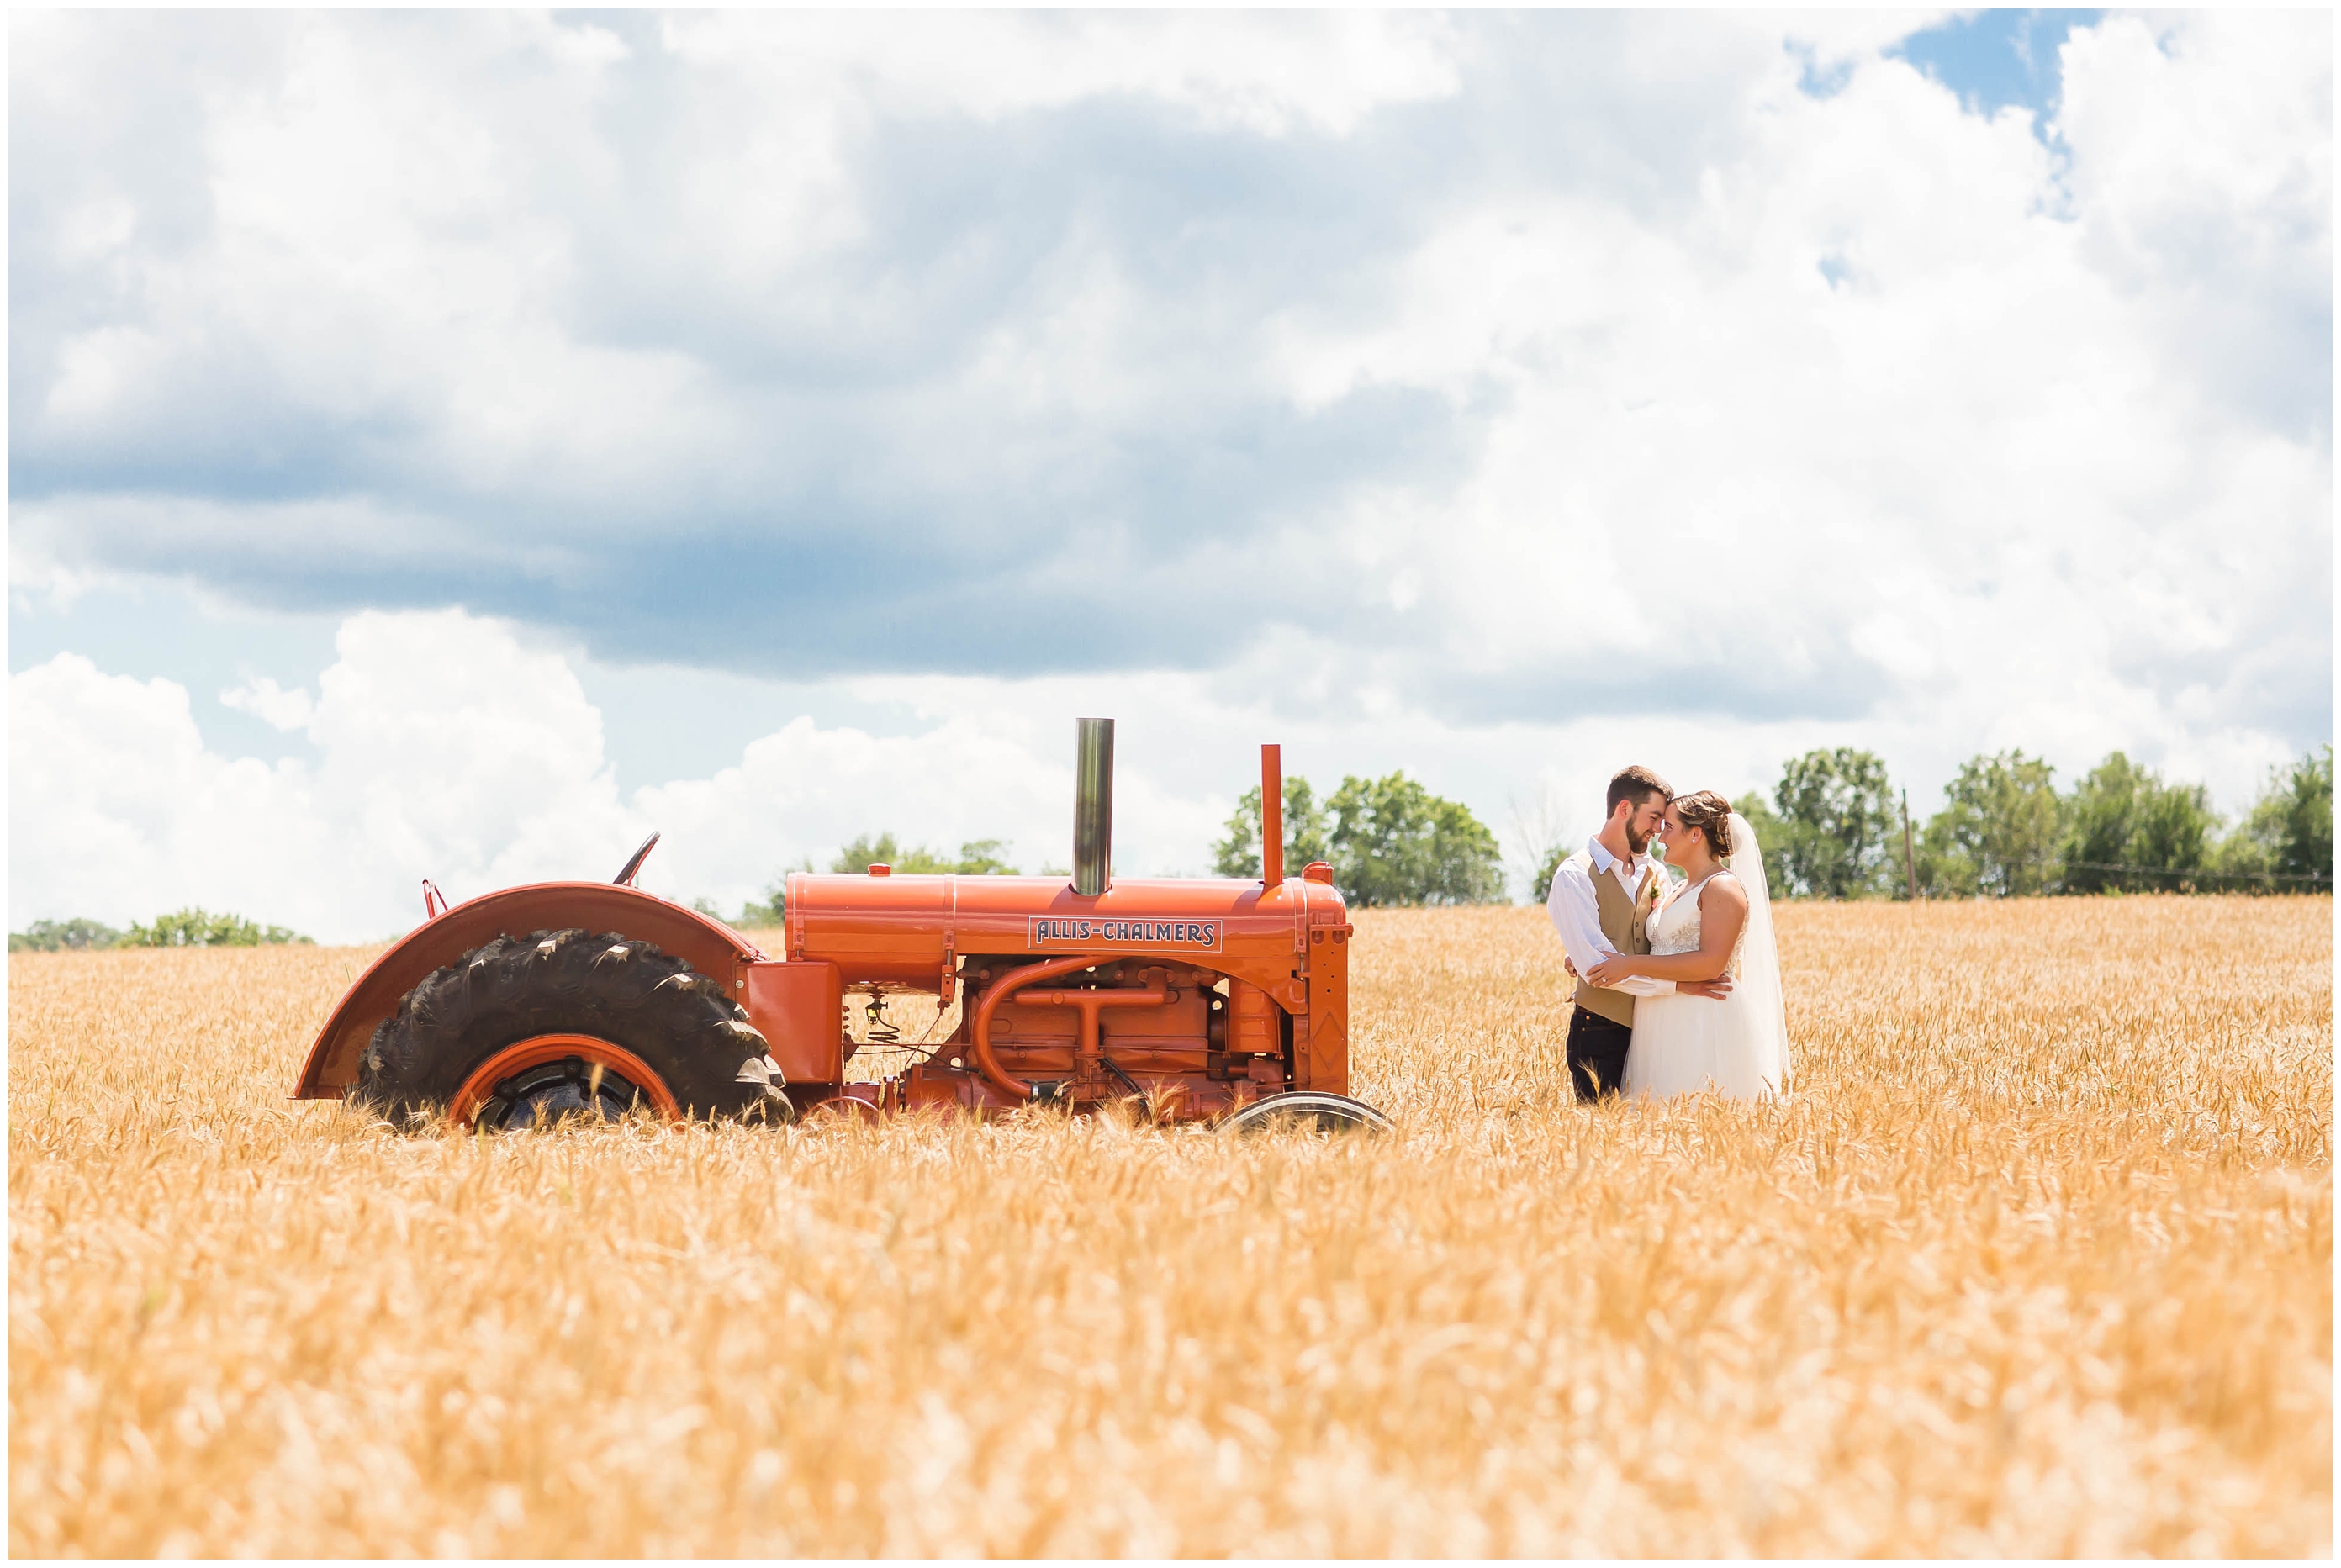 Cleveland Wedding Photographer,classic tractor with bride and groom,loren jackson photography,photographer akron ohio,wheat field wedding photos,